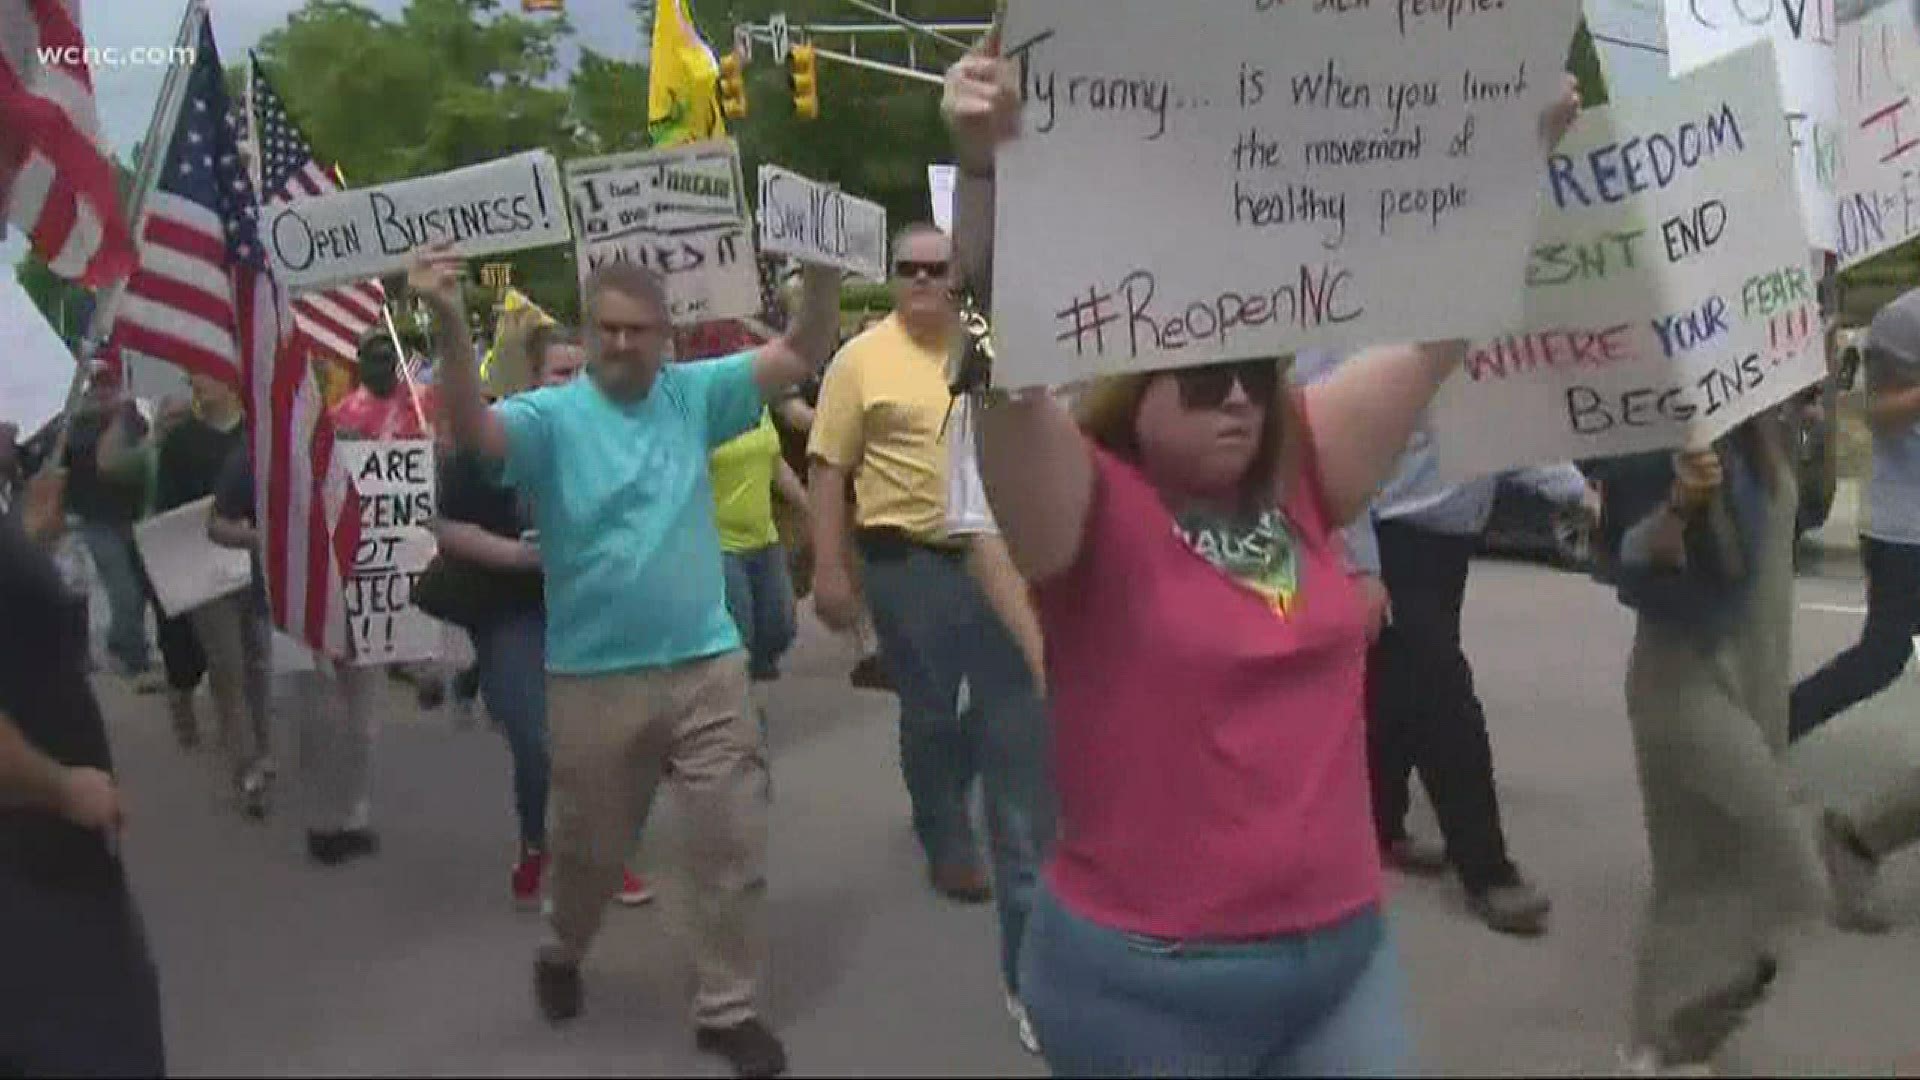 Dozens from ReOpen NC protested through the streets of Uptown Charlotte Friday afternoon.